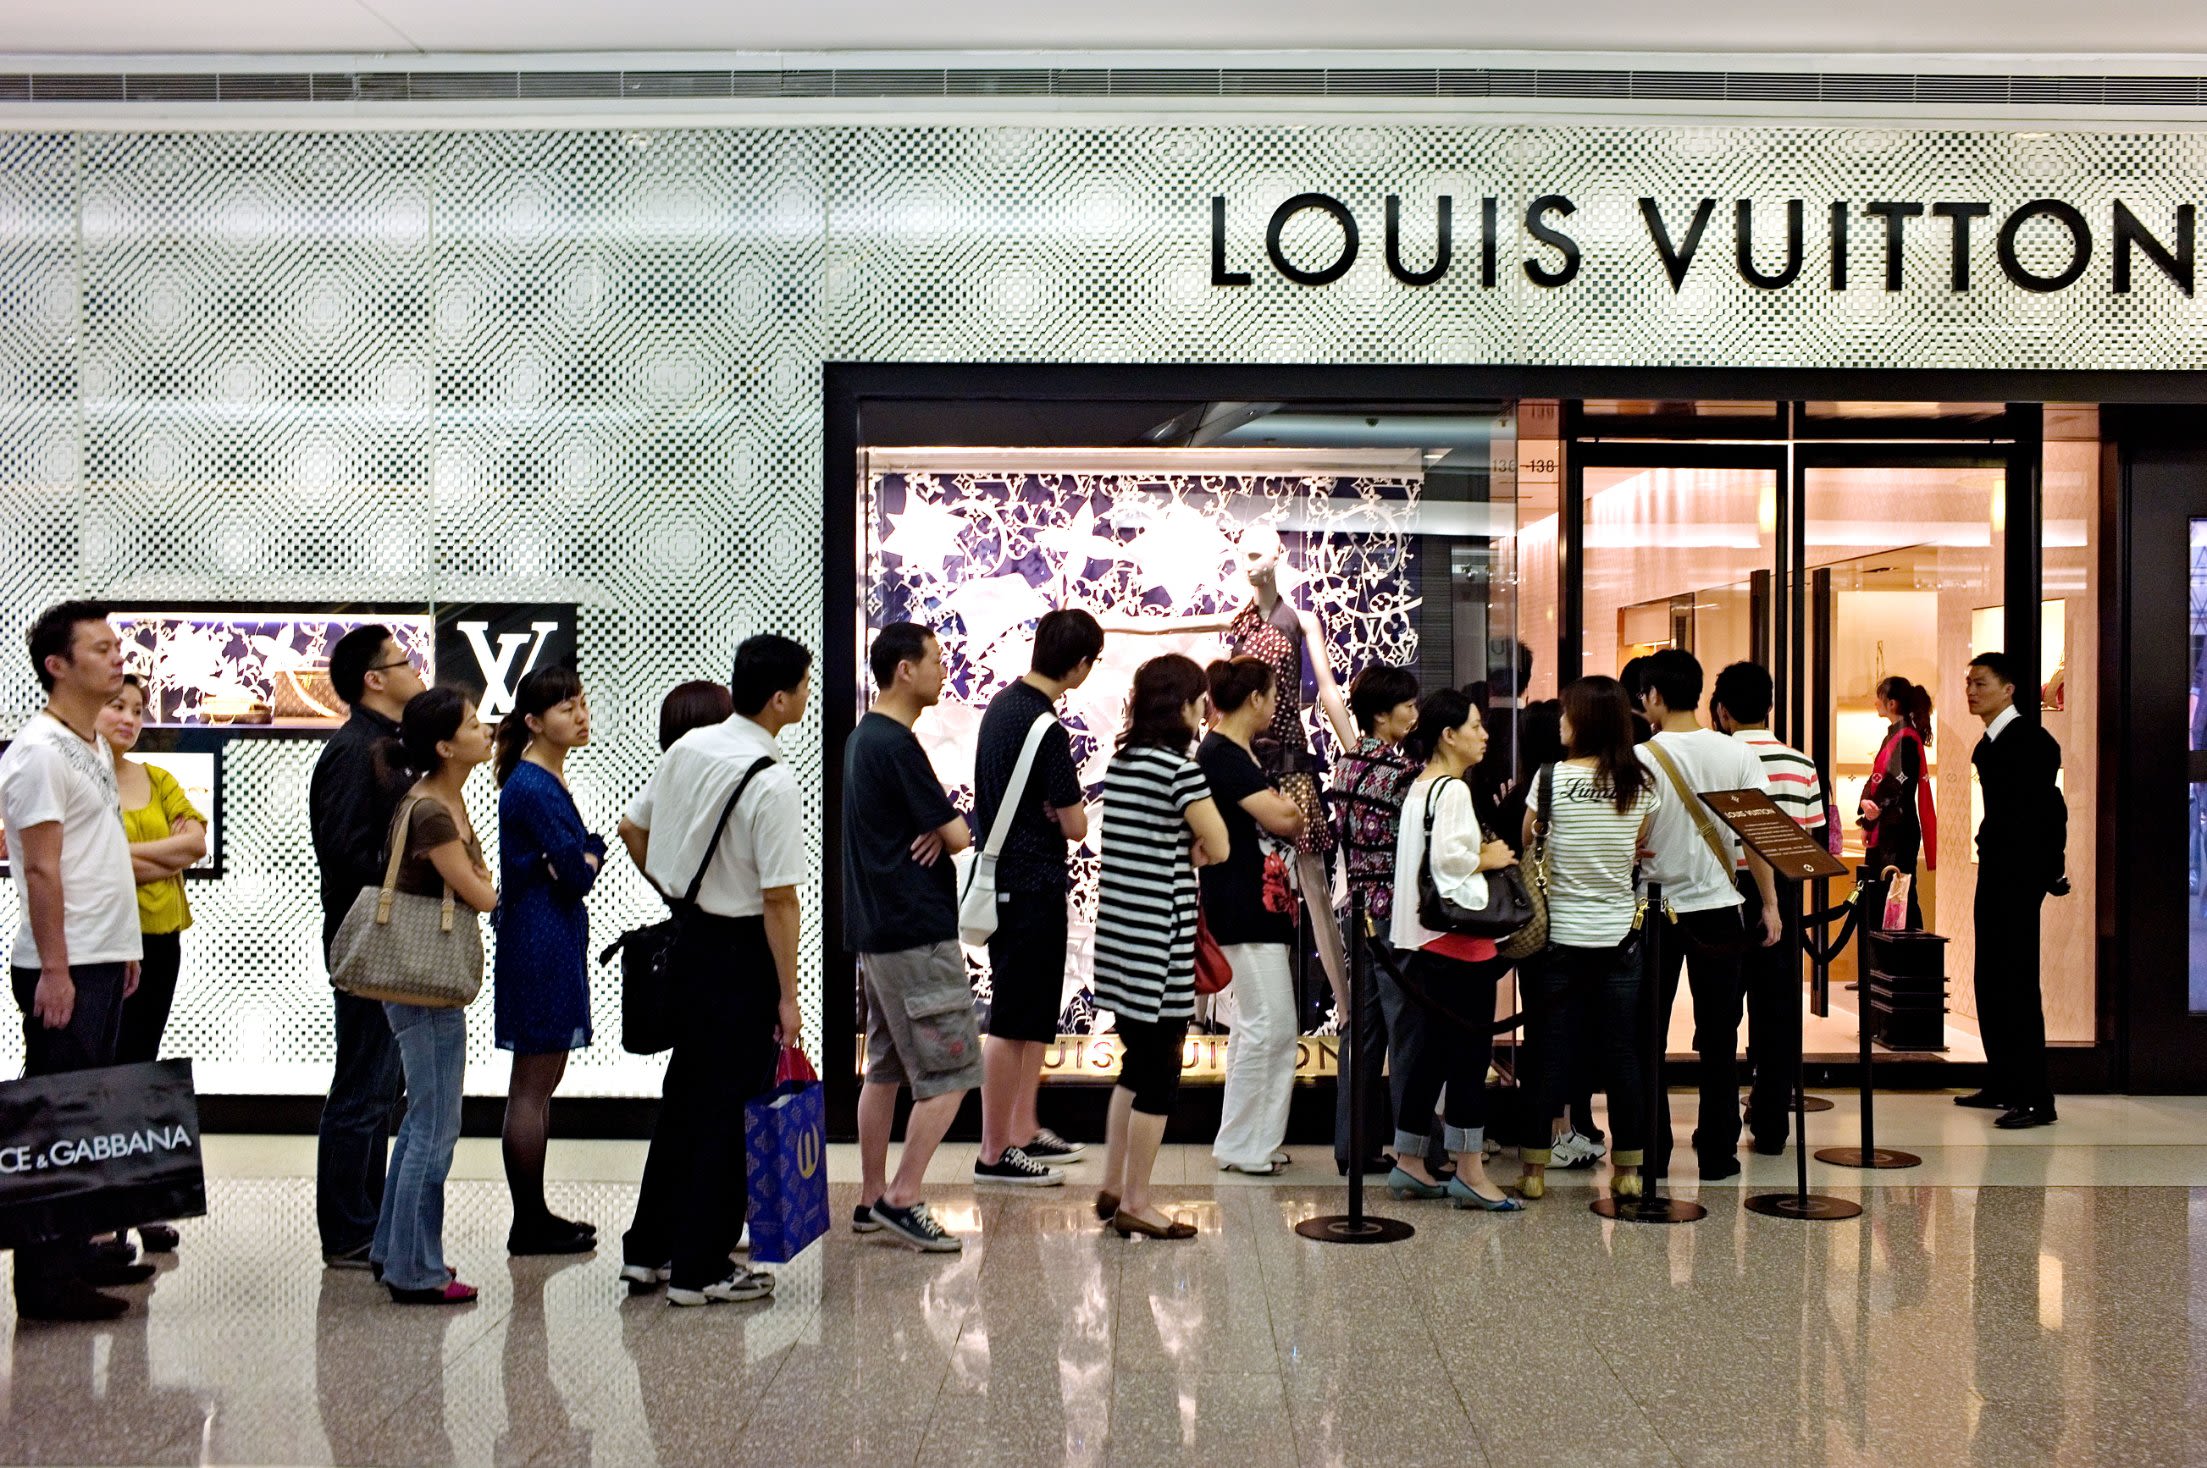 EXCLUSIVE: Louis Vuitton Opens The Hall, Its First Restaurant in China